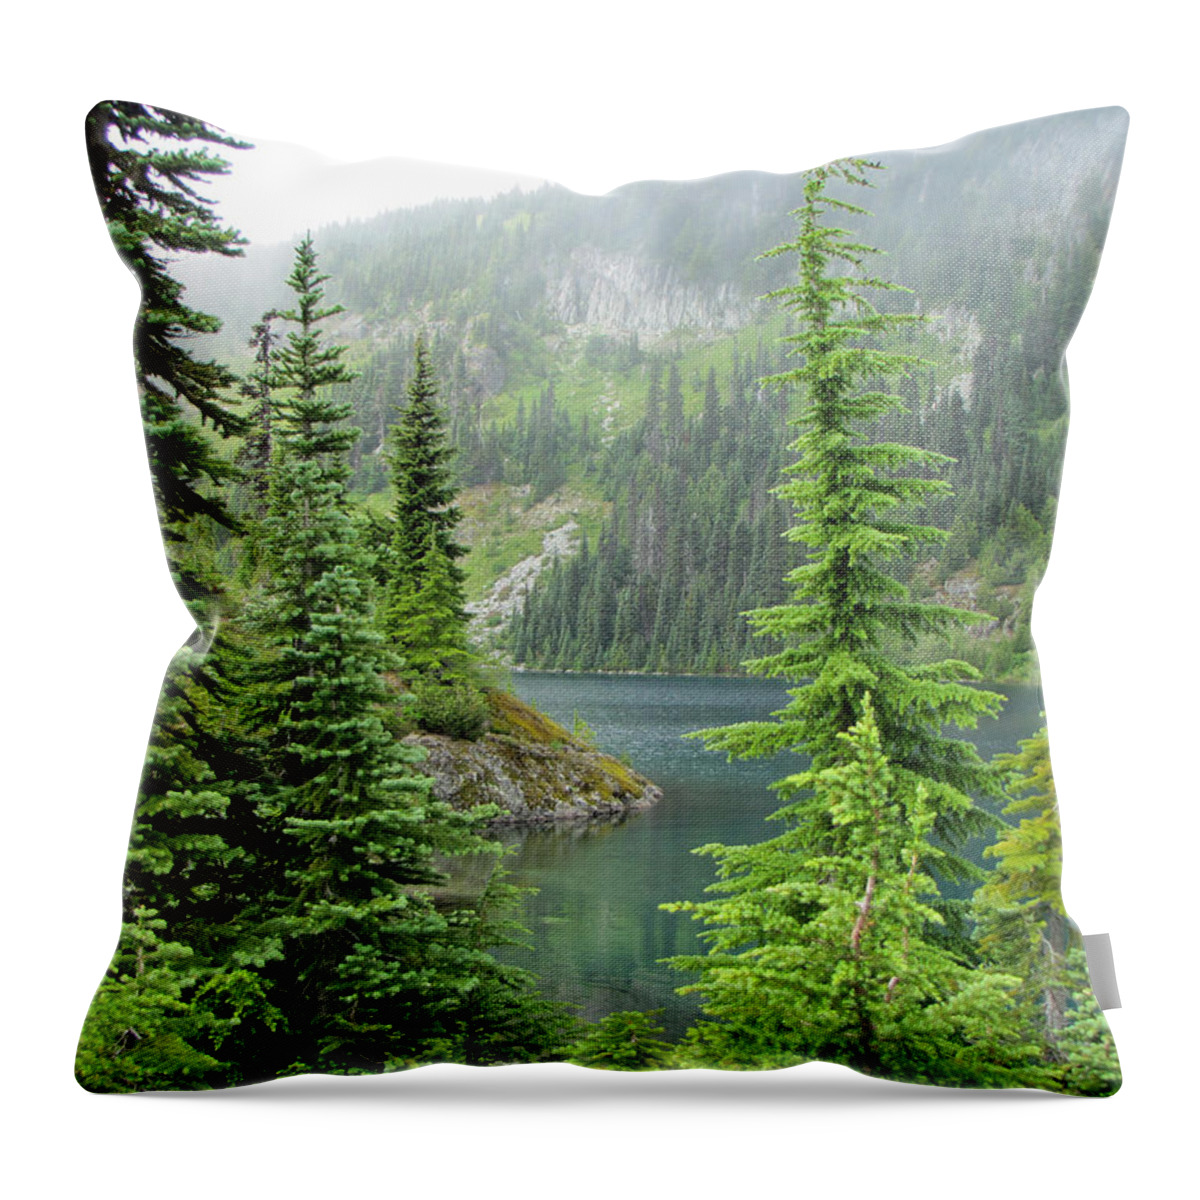 Pacific Northwest Throw Pillow featuring the photograph Lake Eunice II by Tikvah's Hope